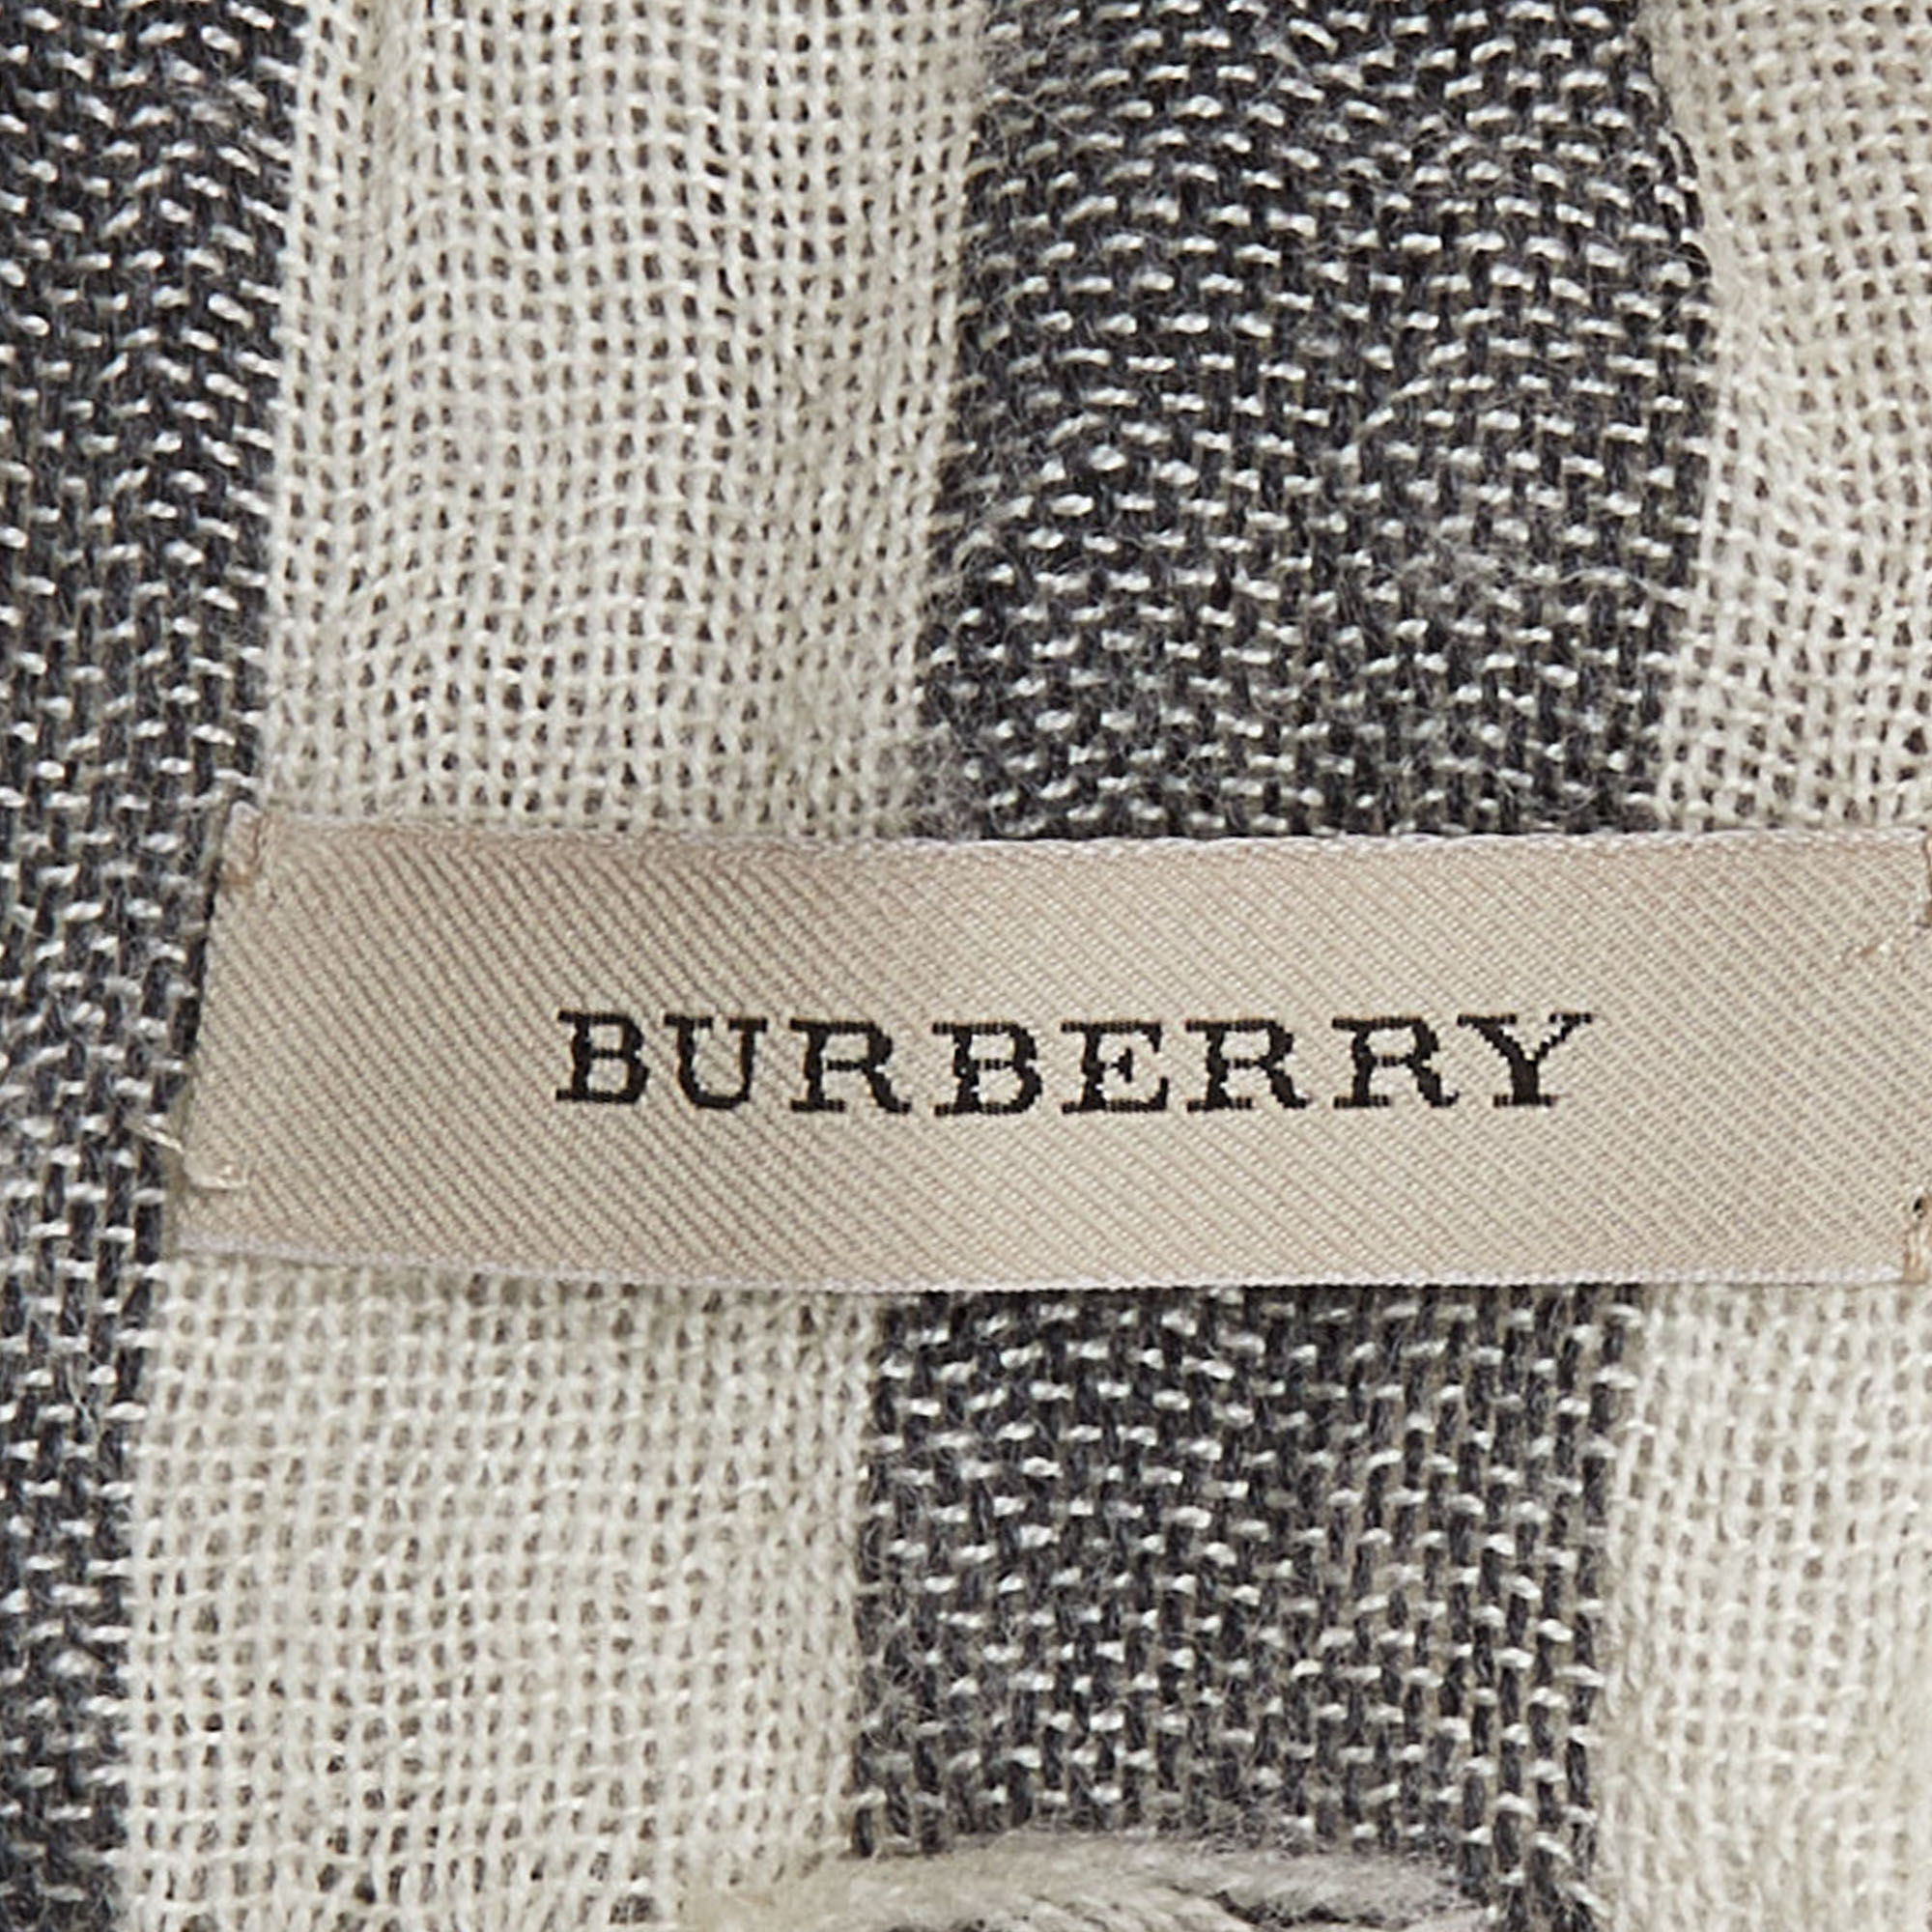 Burberry Cream/Black Checked Wool Stole